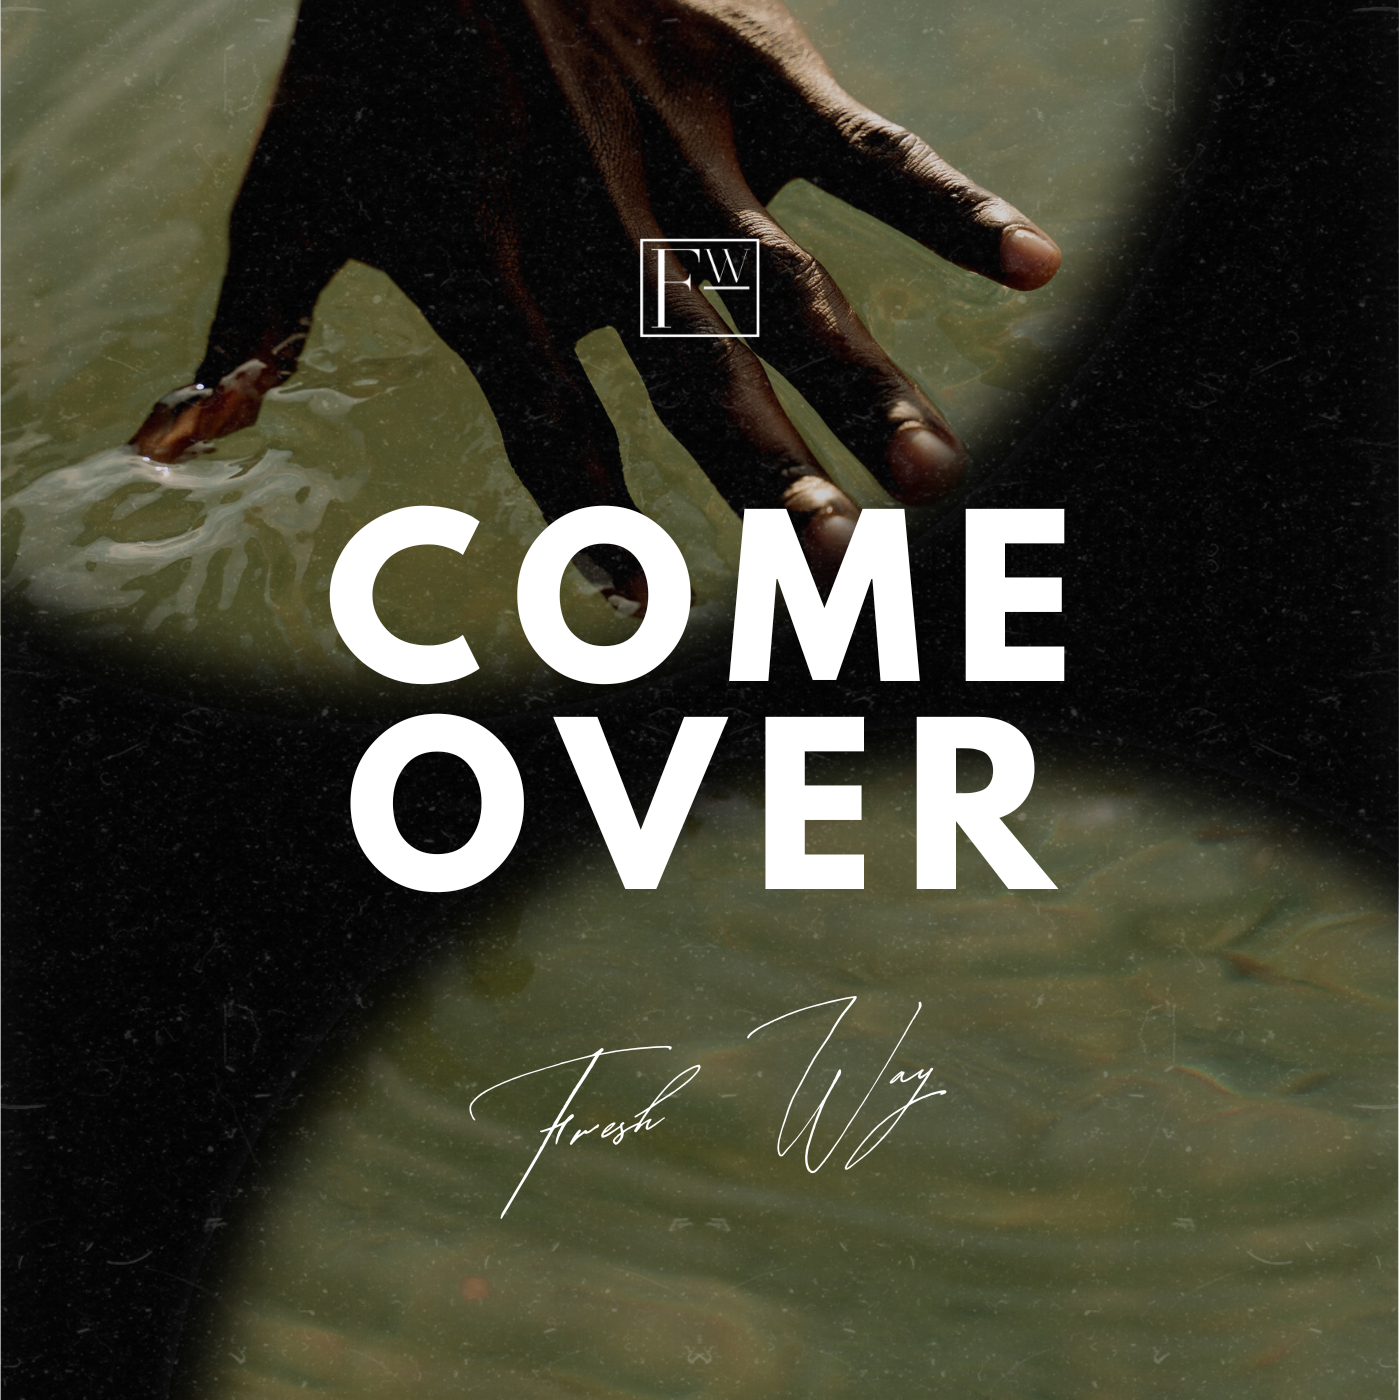 Art for Come Over by Fresh Way